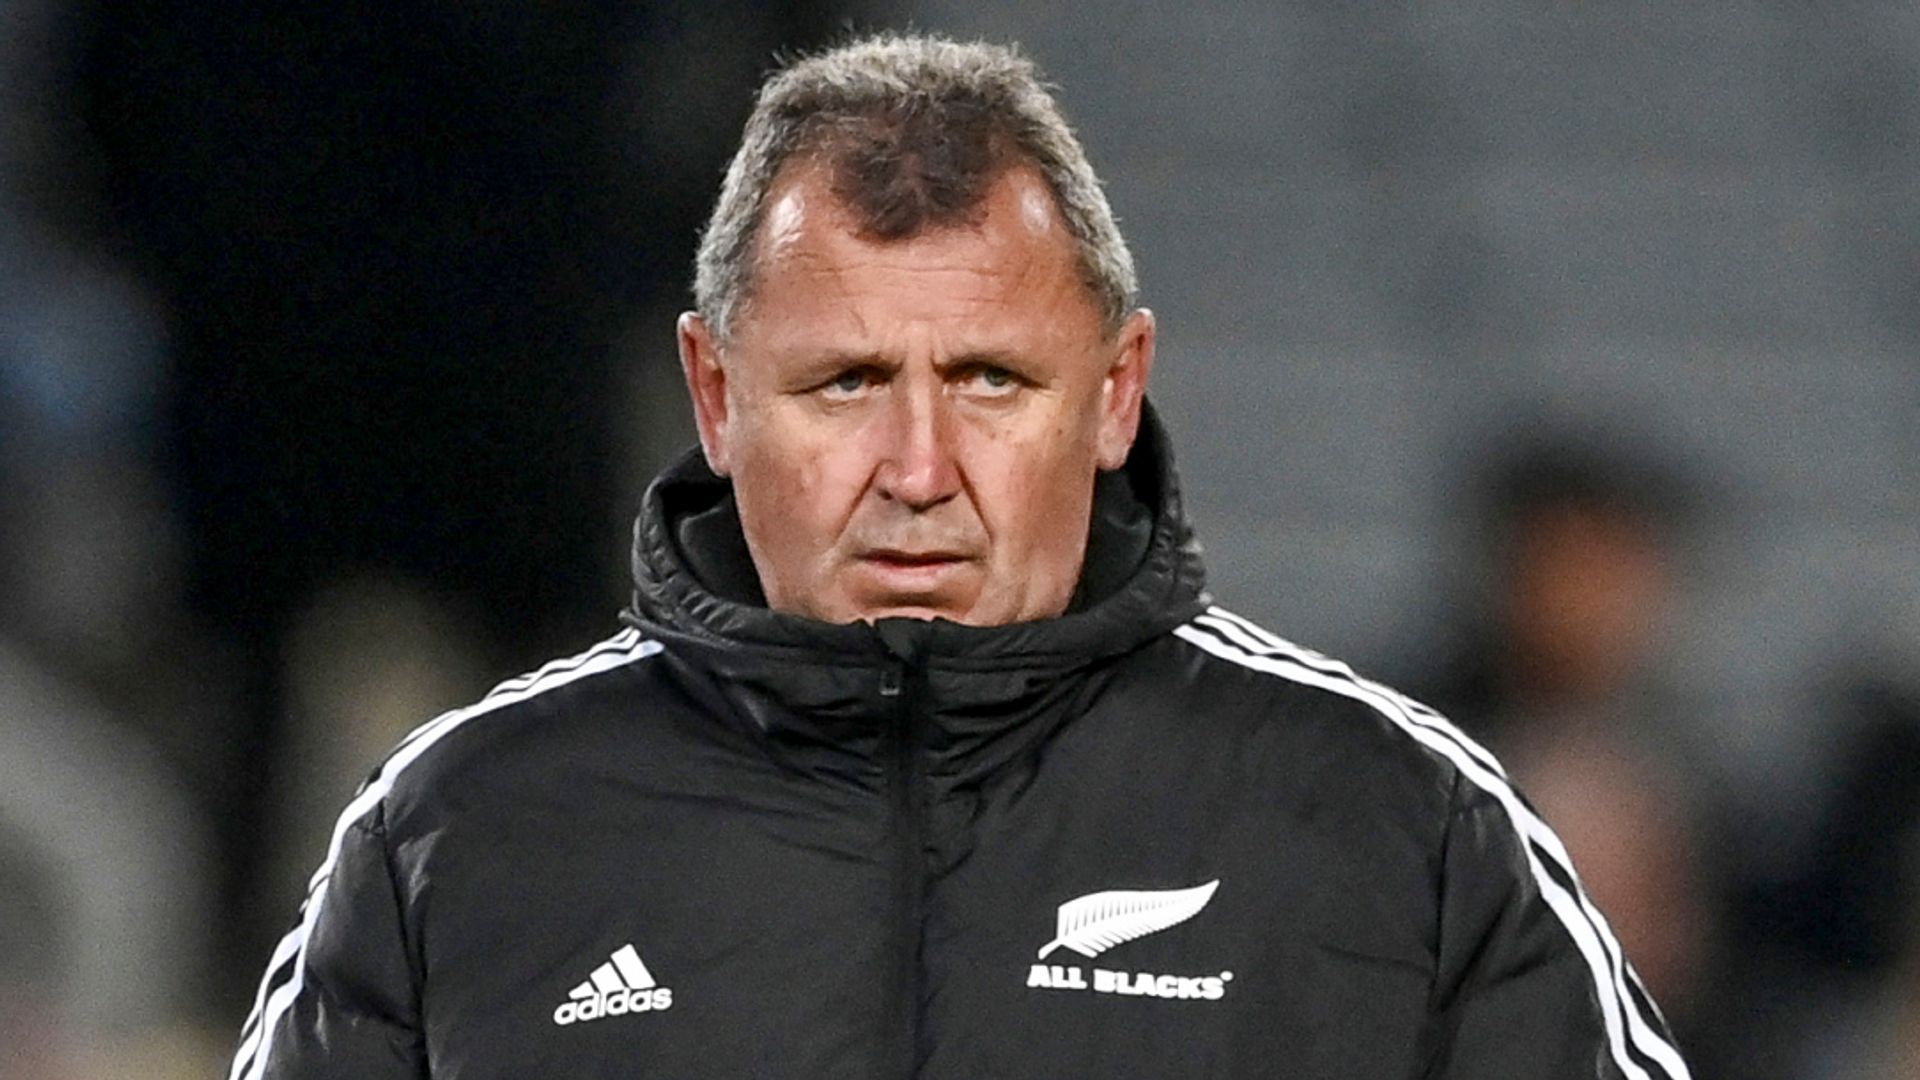 Foster and All Blacks under intense pressure in South Africa